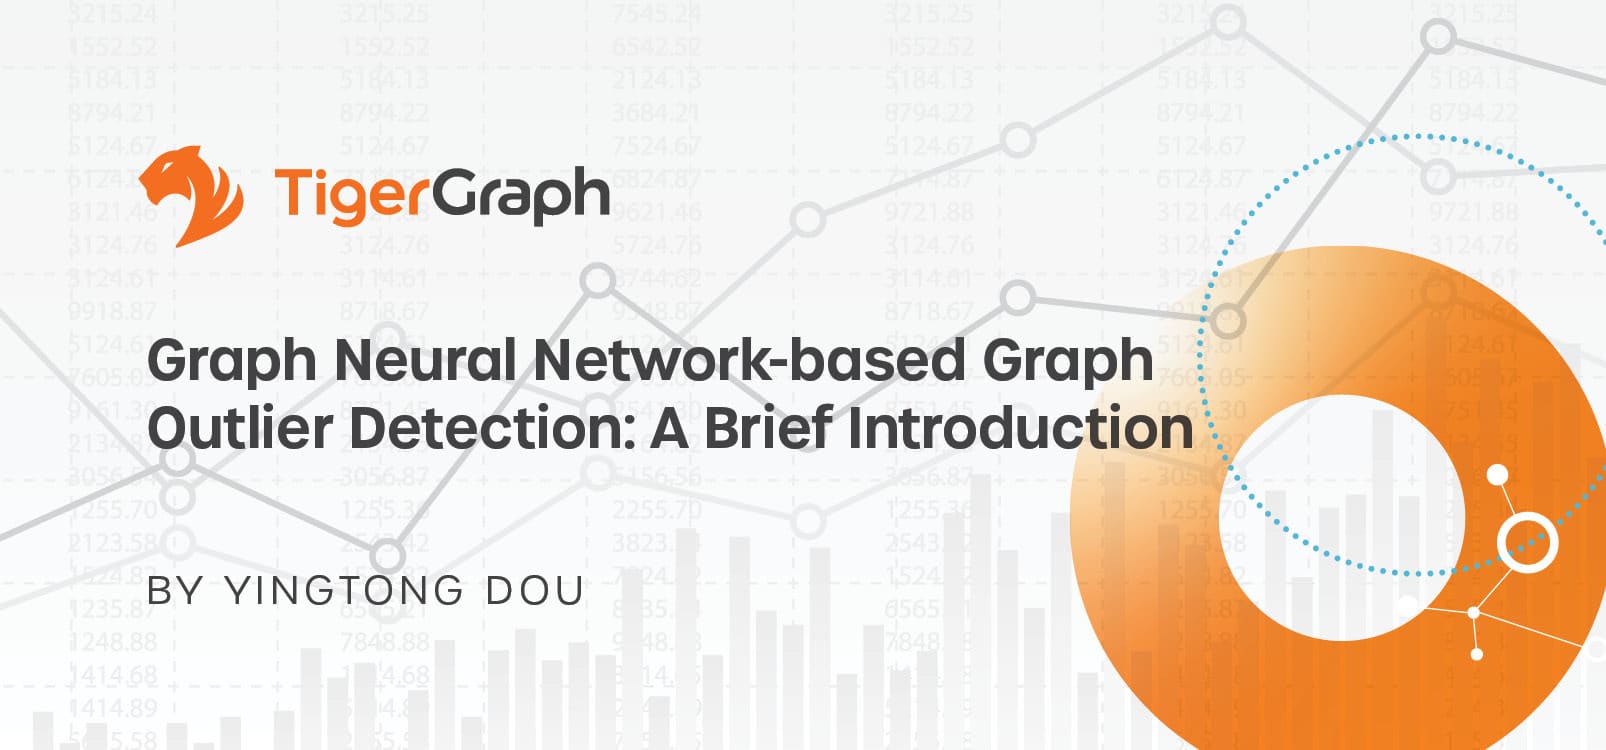 Graph Neural Network-based Graph Outlier Detection: A Brief Introduction